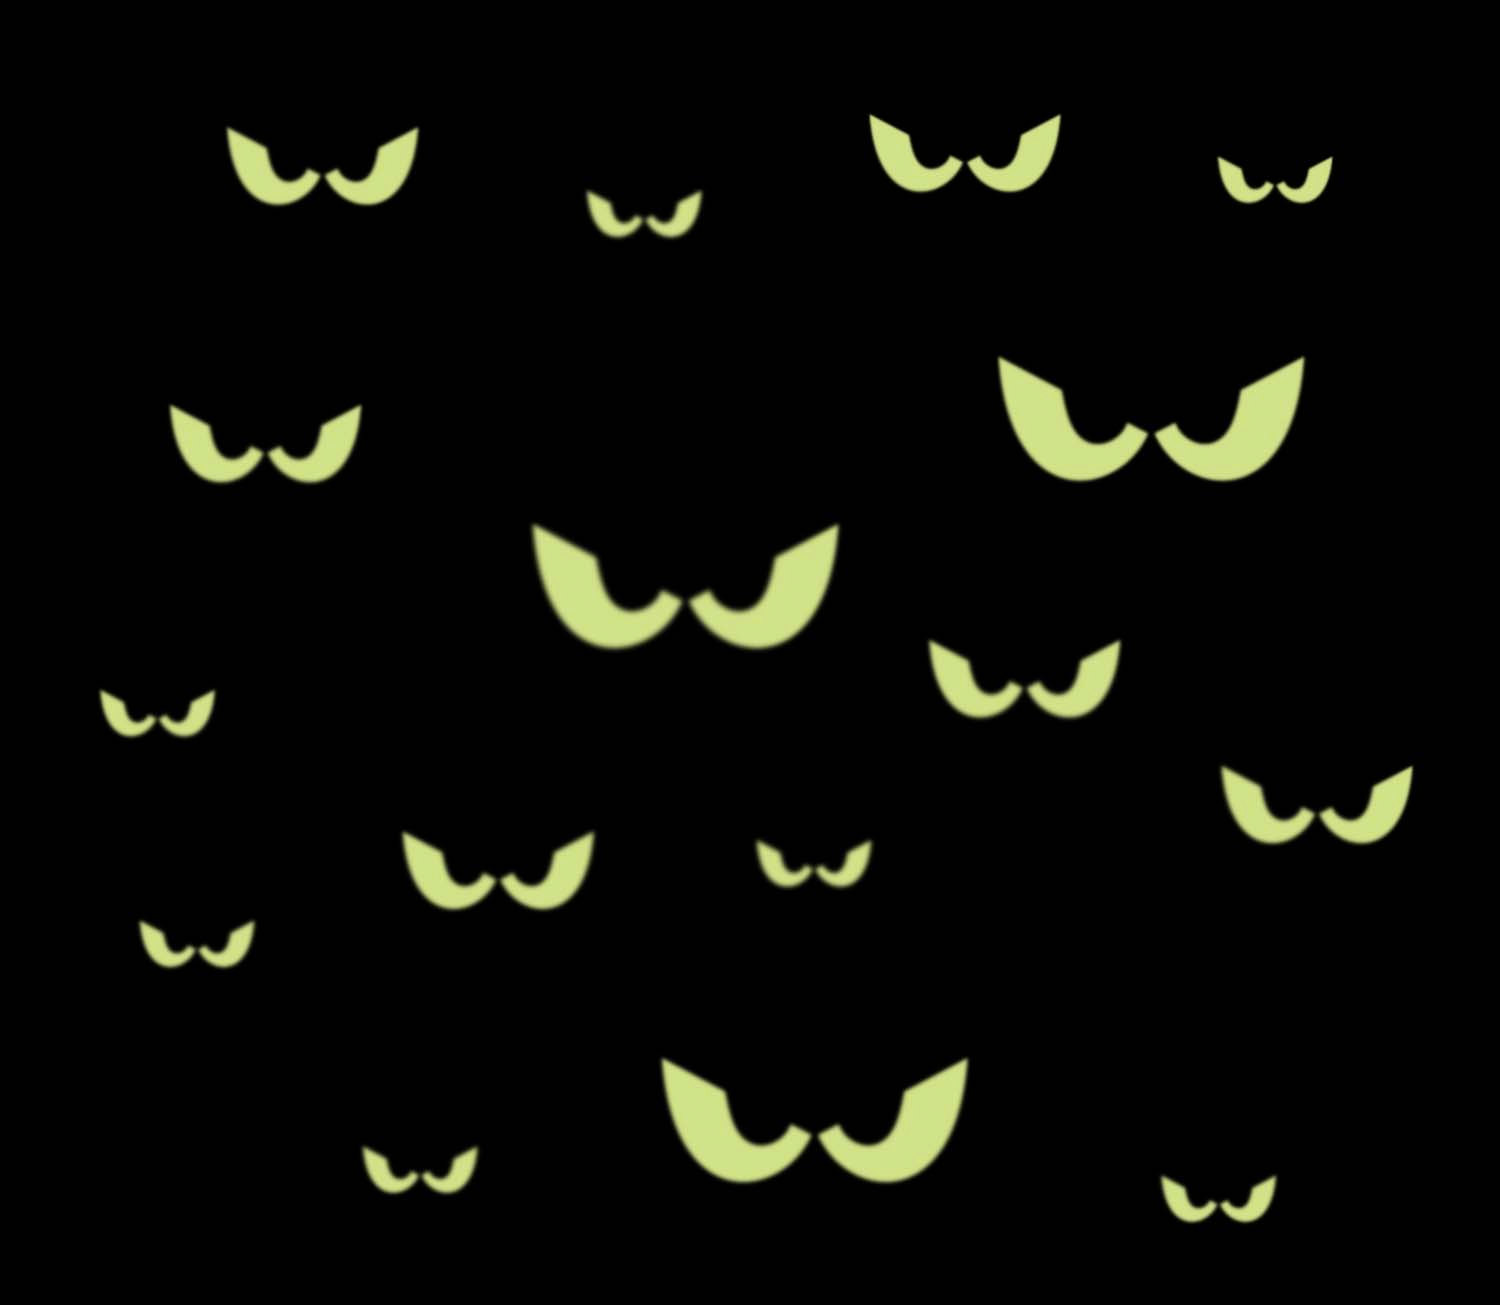 Spooky eyes clipart blavk and white - ClipartFest